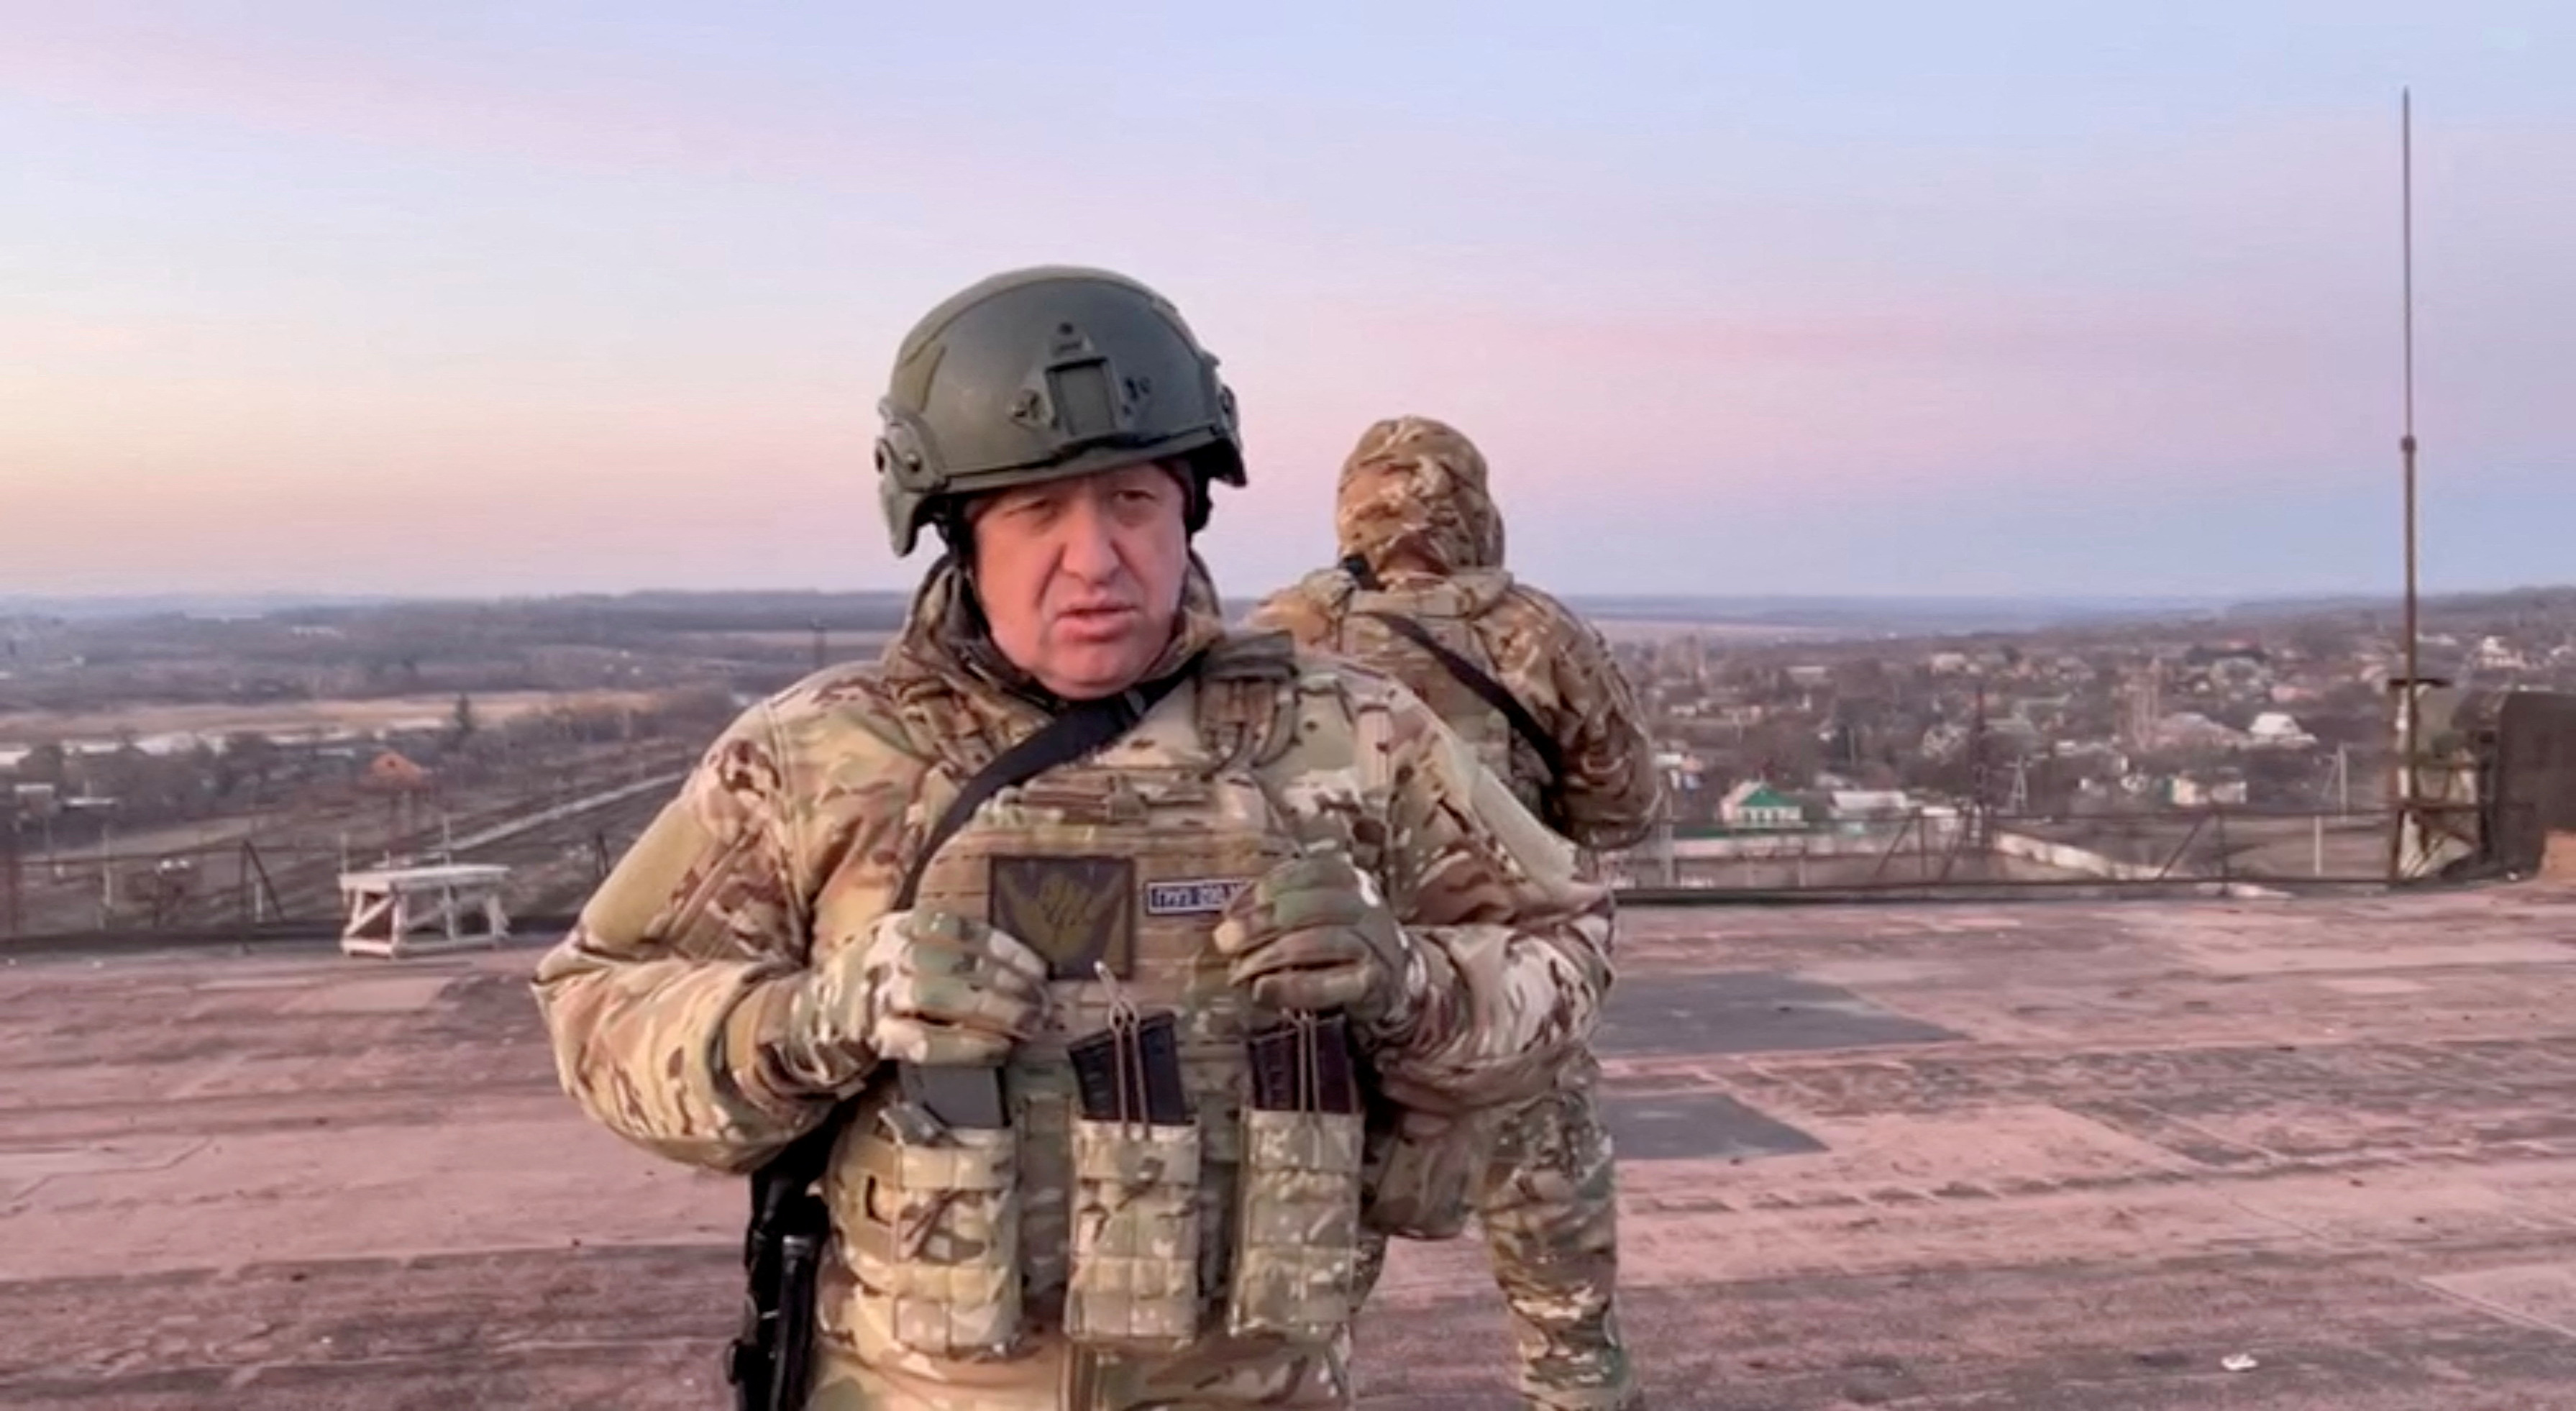 Yevgeny Prigozhin, founder of Russia's Wagner mercenary force, released a social media video from Paraskoviivka, where he called for Ukraine to withdraw from Bakhmut. /Reuters via third party.